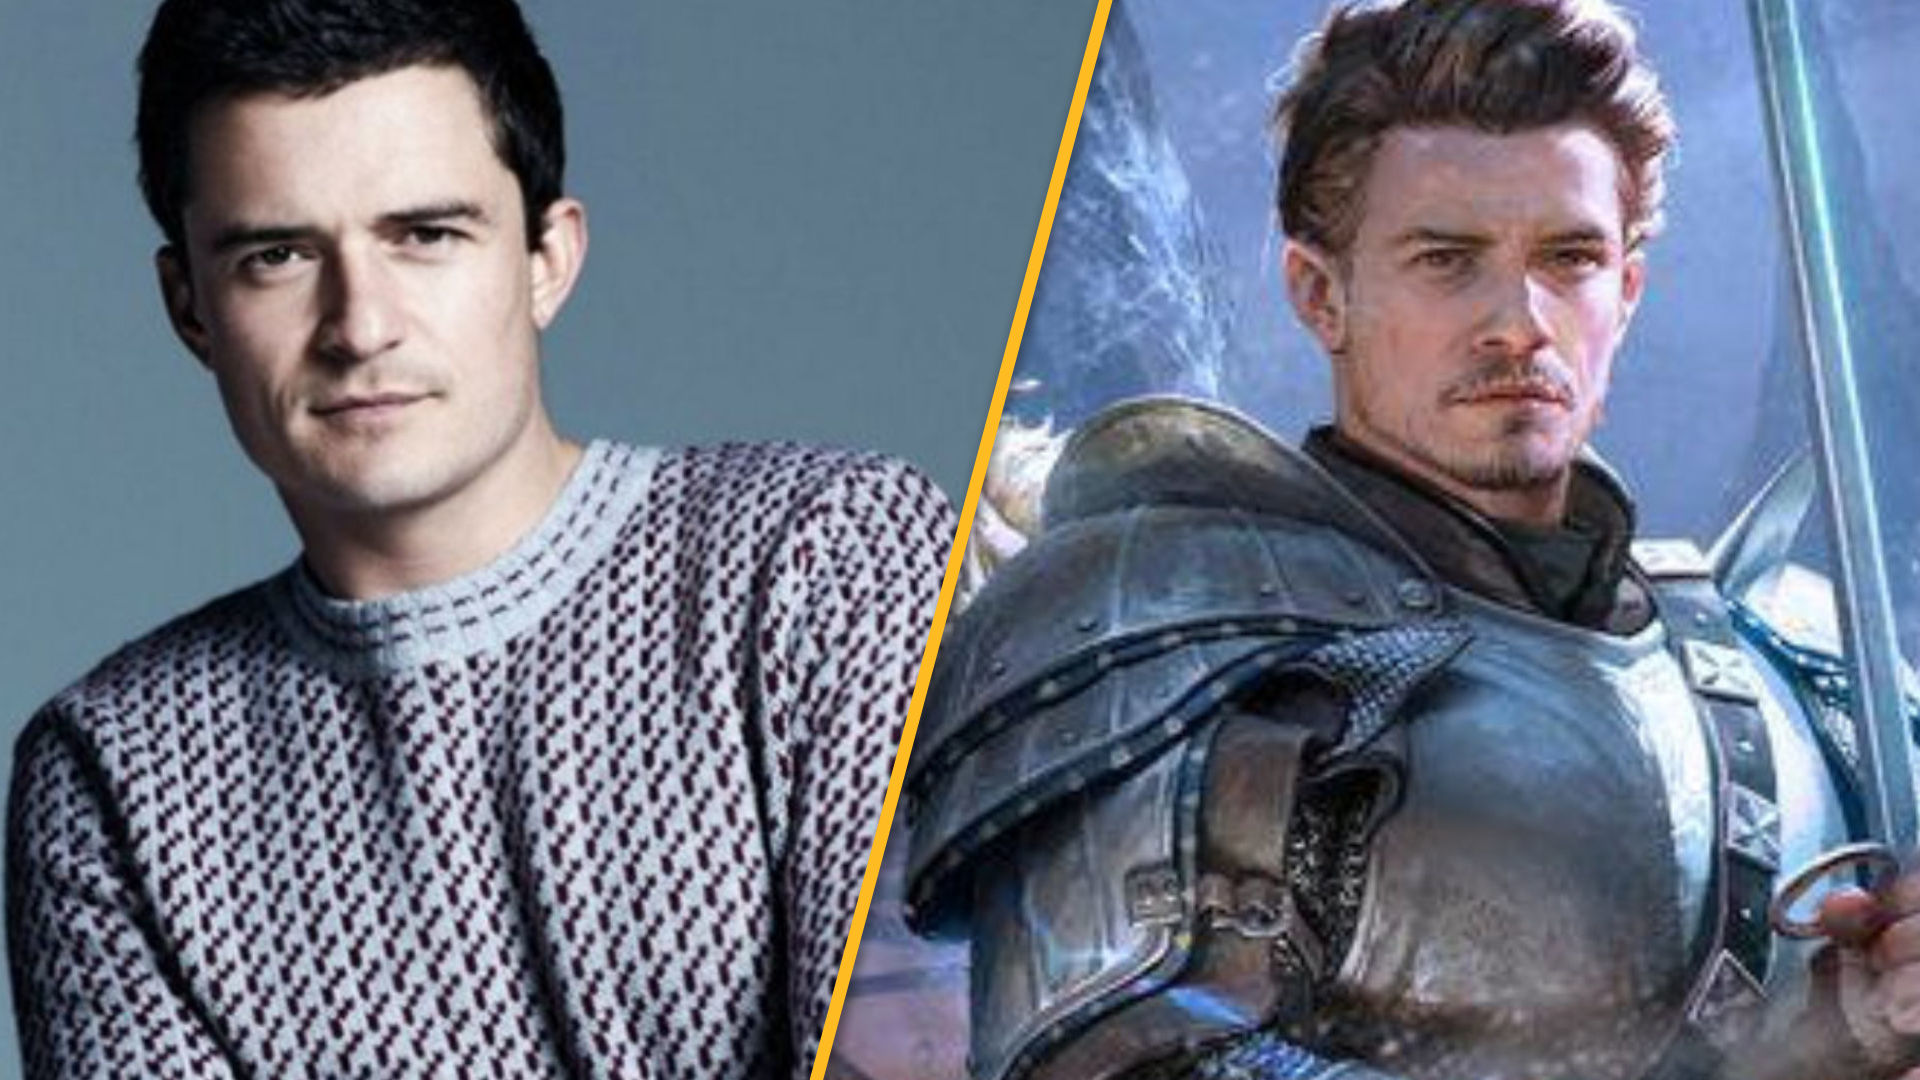 Orlando Bloom trades his bow for a sword in King of Avalon